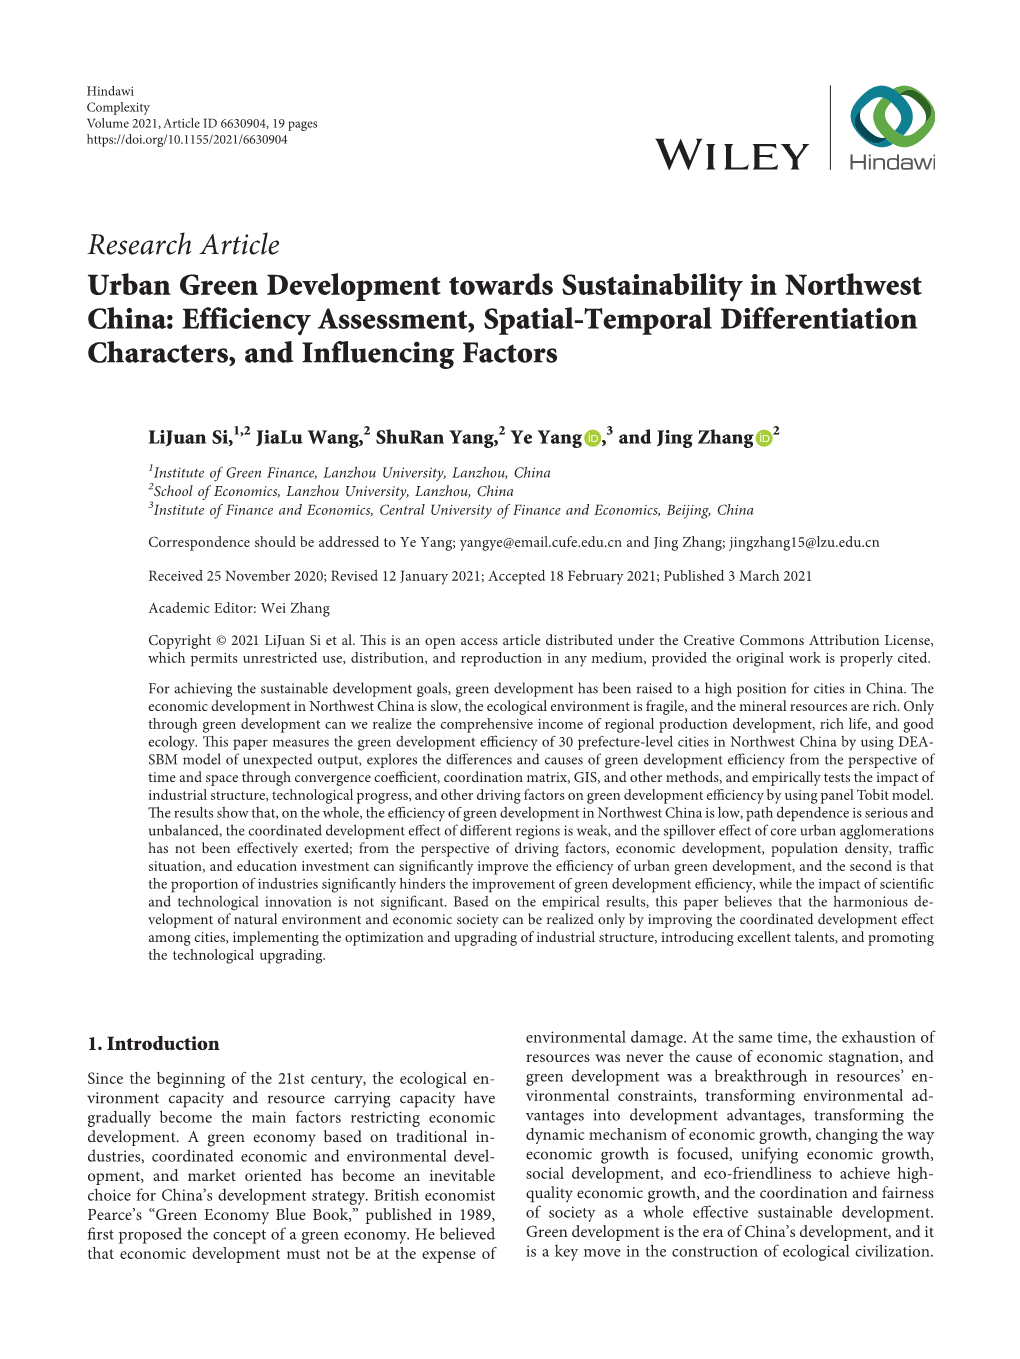 Urban Green Development Towards Sustainability in Northwest China: Efficiency Assessment, Spatial-Temporal Differentiation Characters, and Influencing Factors